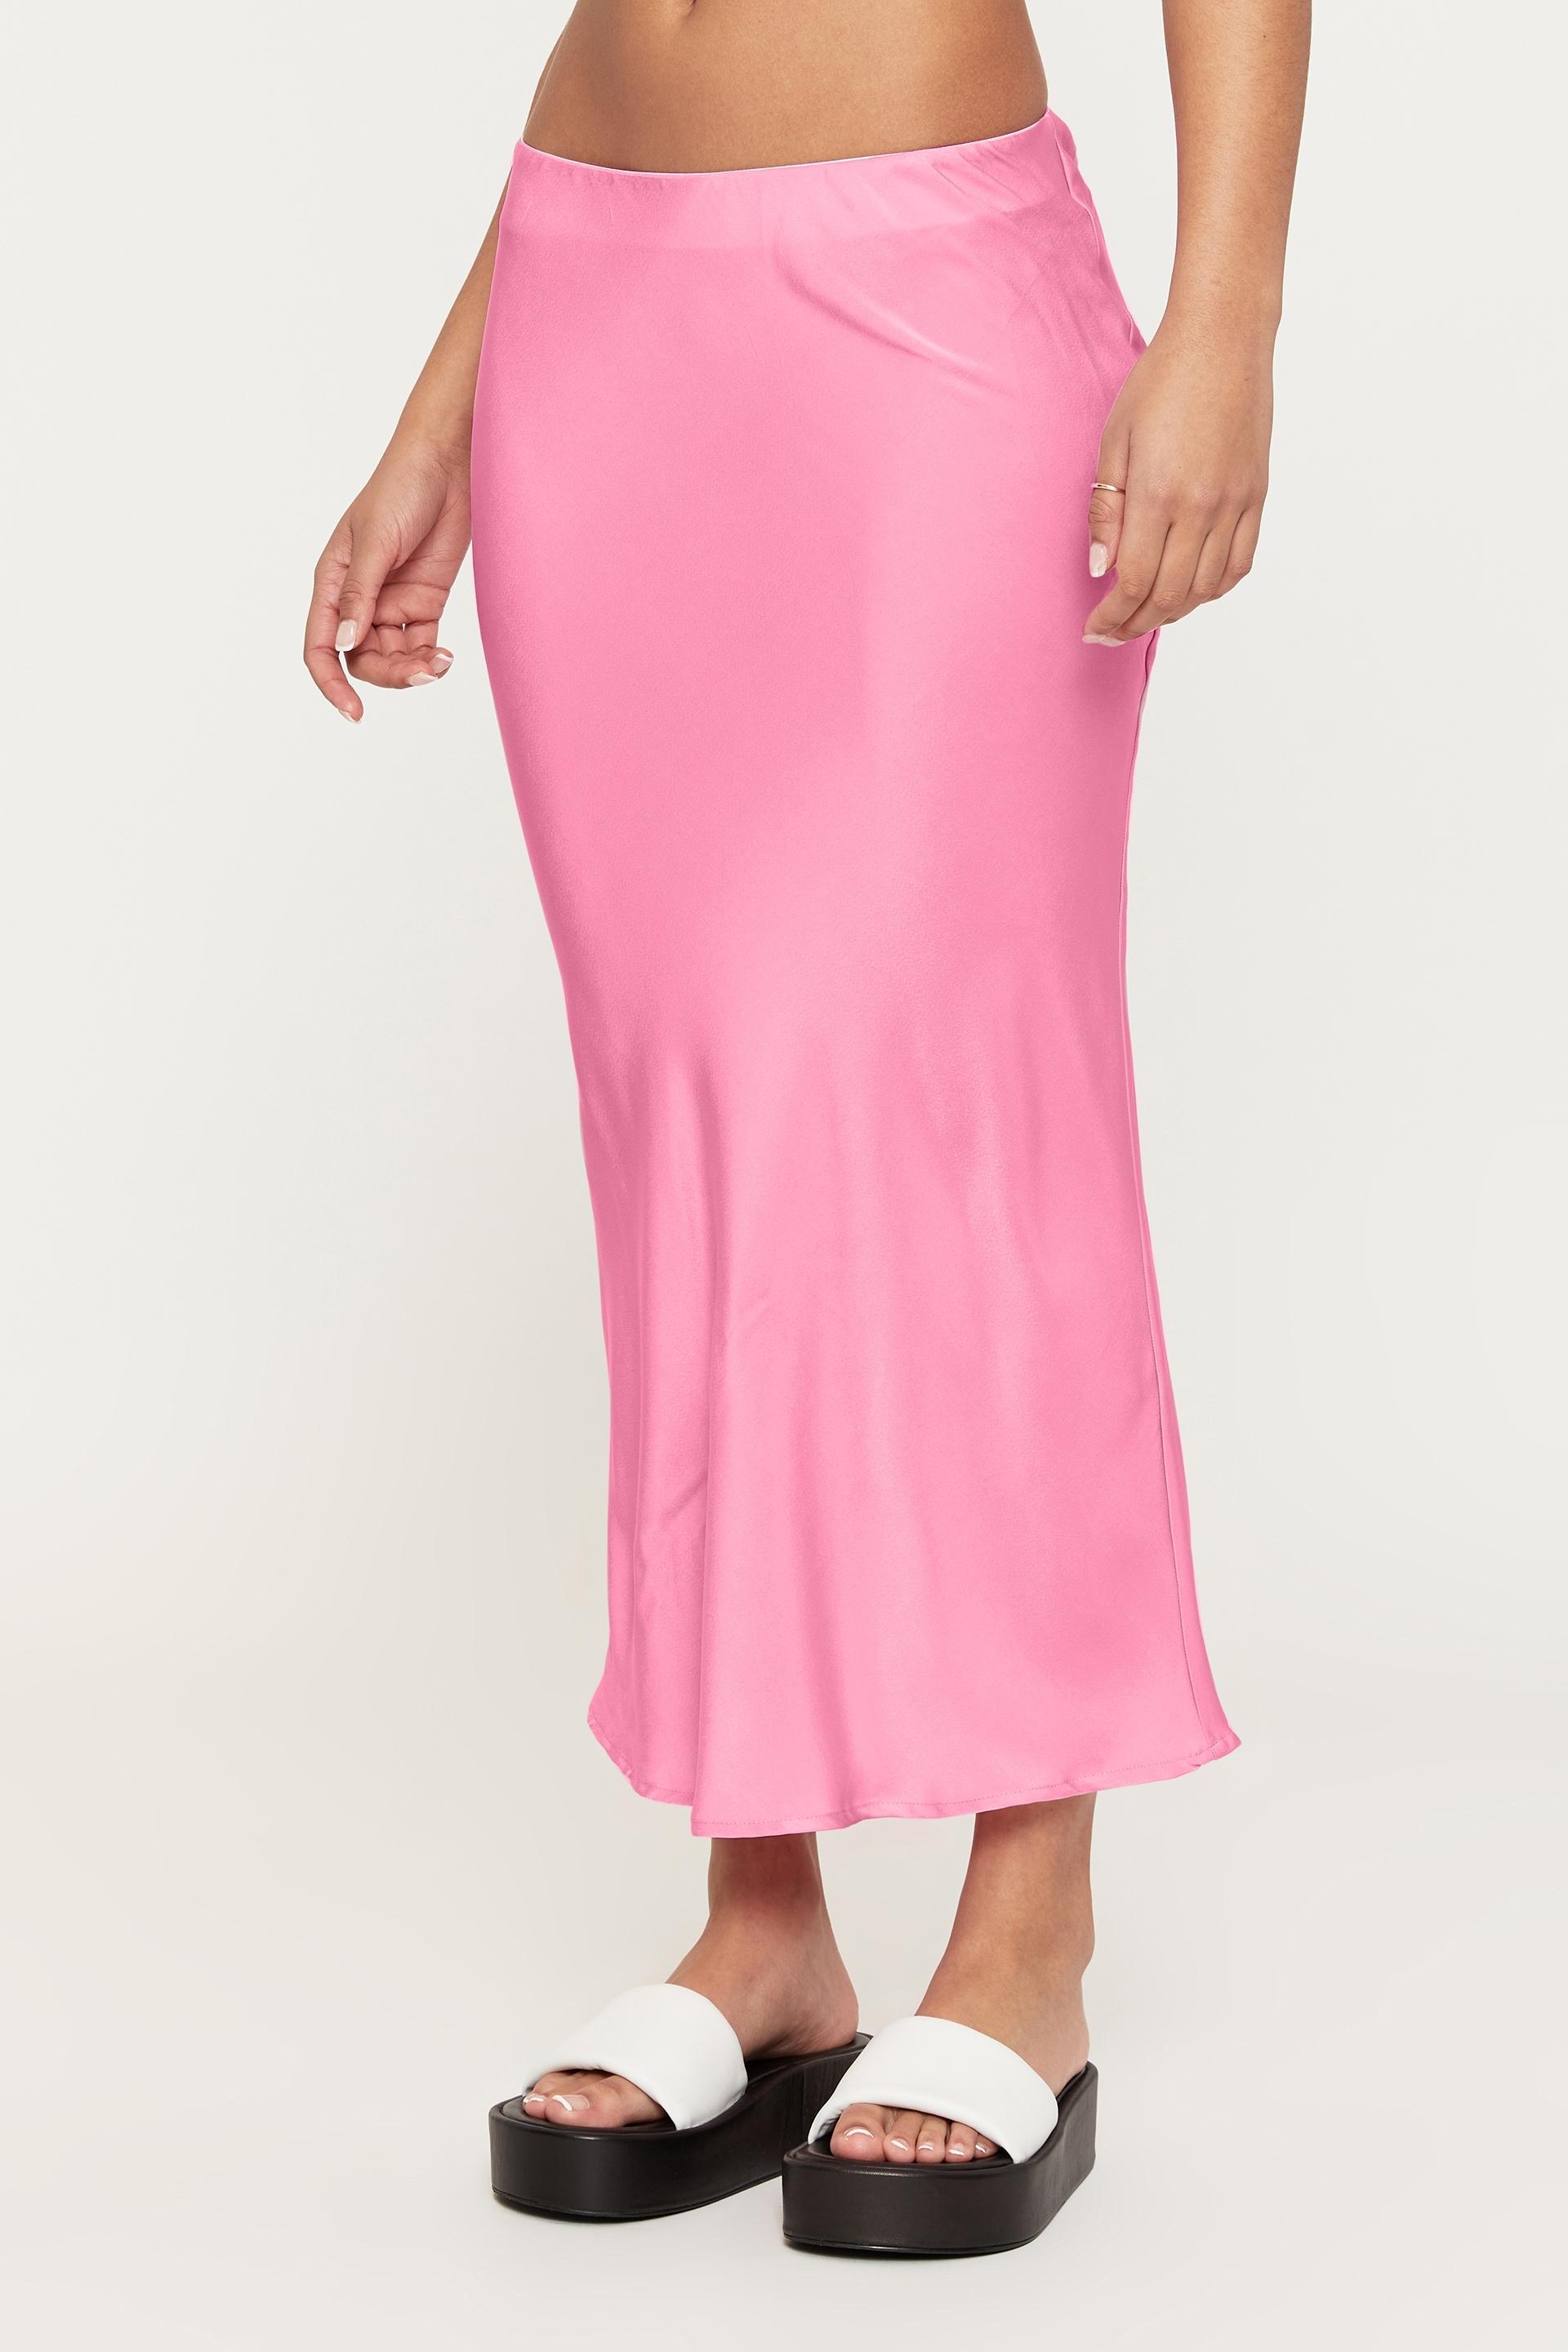 Ines low rise satin midi skirt - bubble gum pink Supré Skirts ...